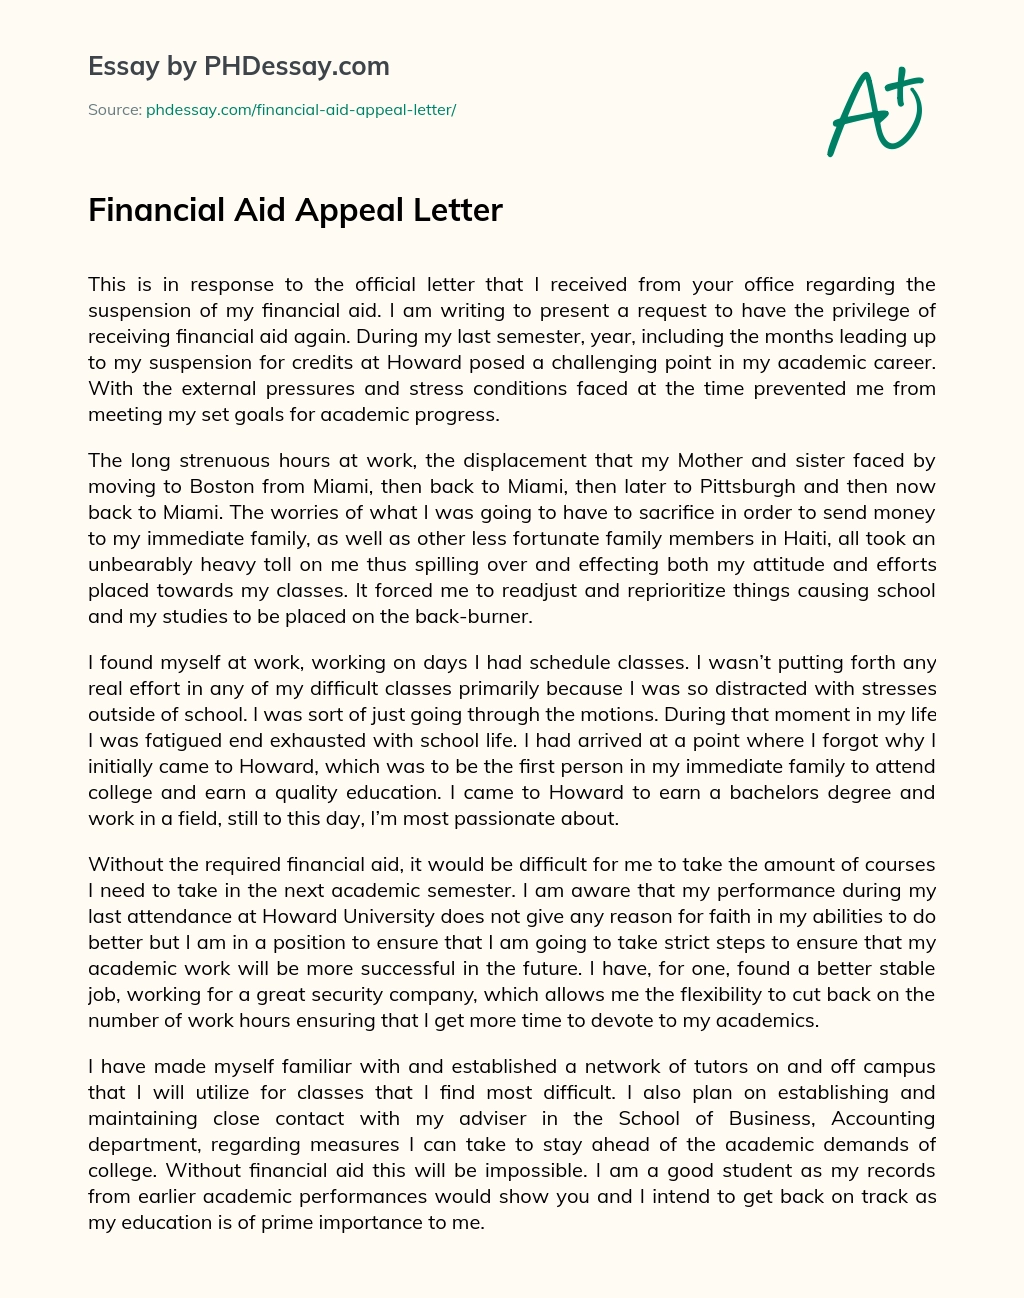 Financial Aid Appeal Letter essay